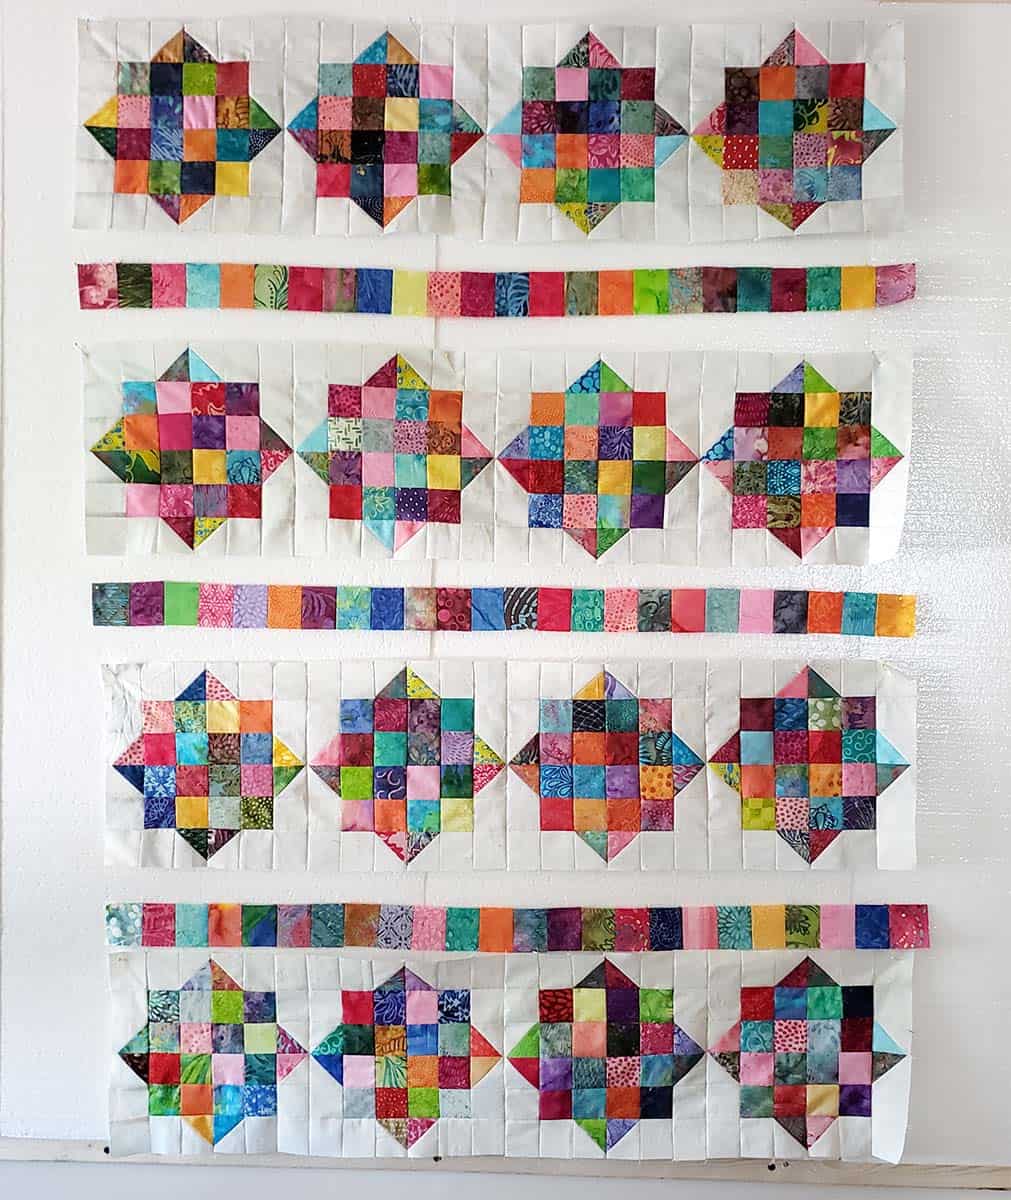 Piecing the rows of the River Scraps quilt pattern